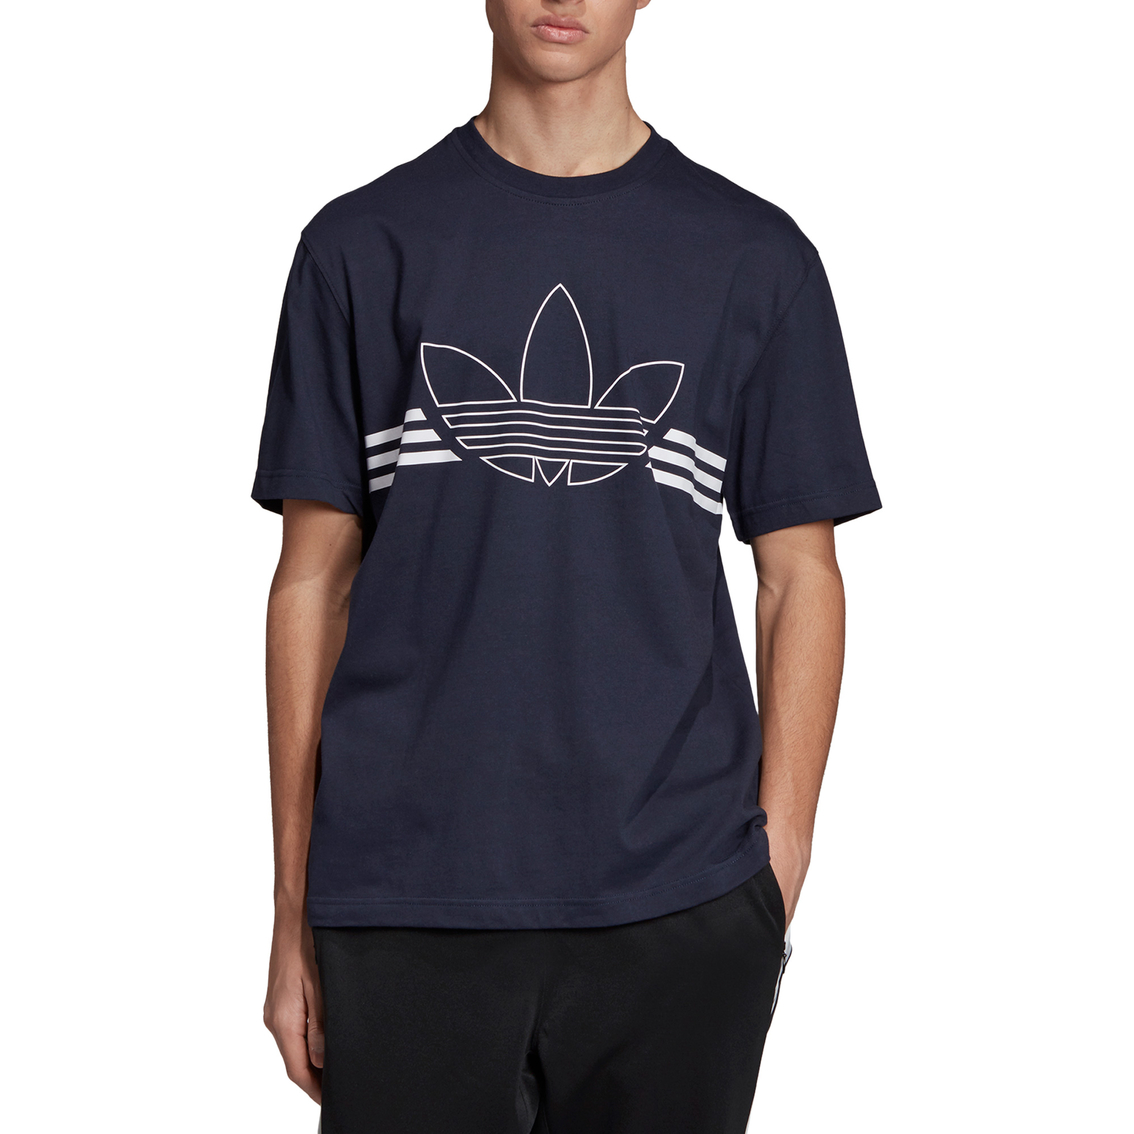 Adidas Outline Trefoil Tee | Shirts | Clothing & Accessories | Shop The ...